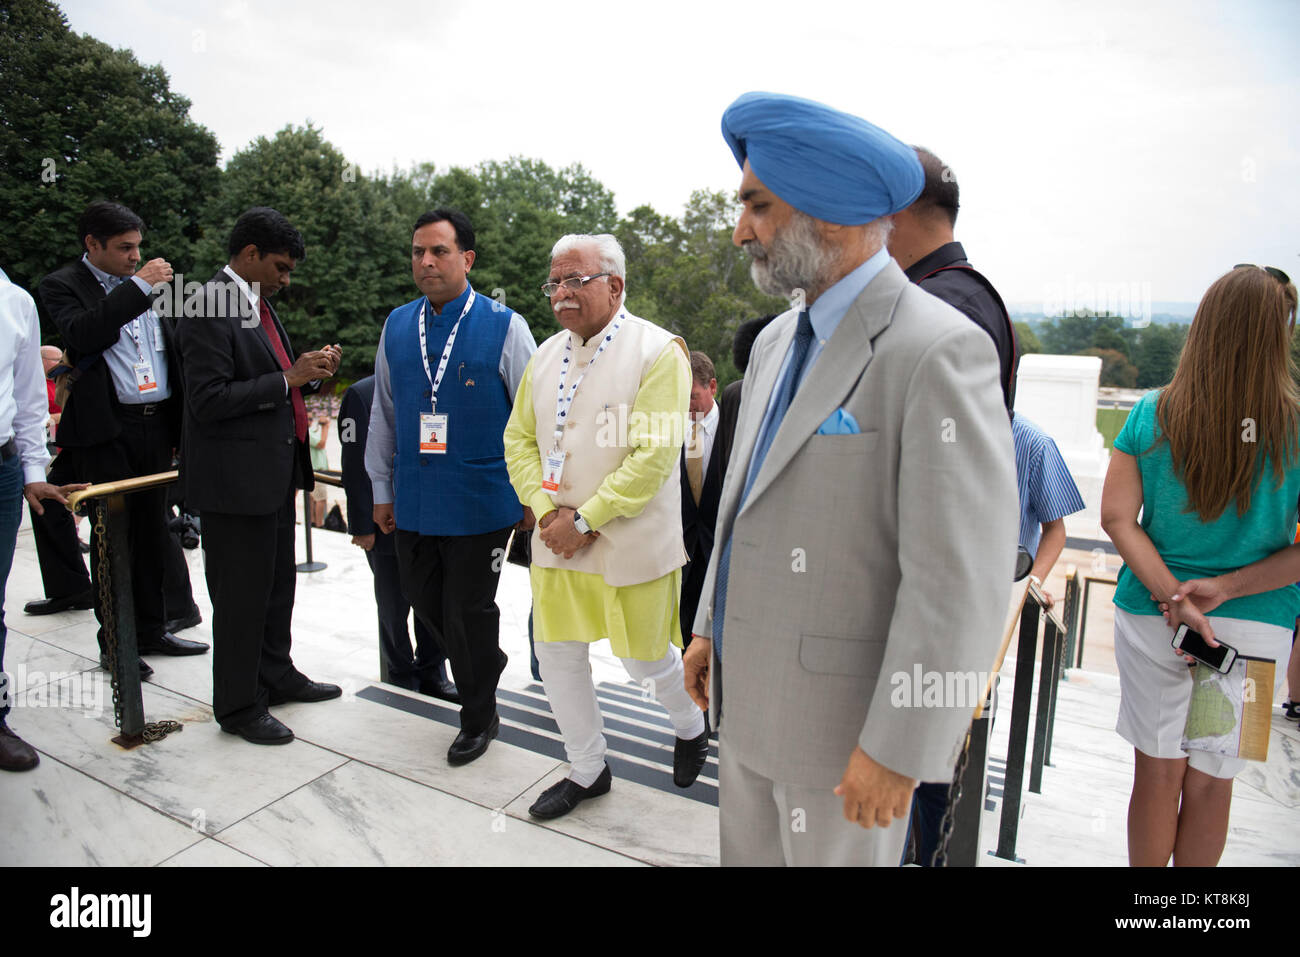 Chief Minister of Haryana, India Manohar Lal Khattar, along with others in the official party and other visitors, walk toward the Memorial Display Room after watching a Changing of the Guard ceremony at the Tomb of the Unknown Soldier in Arlington National Cemetery, Aug. 18, 2015, in Arlington, Va., immediately following a wreath-laying at the Space Shuttle Columbia Memorial. Kalpana Chawla, one of seven crew members killed during the Columbia disaster. She was born in Karnal, India, and was posthumously awarded the Congressional Space Medal of Honor, the NASA Space Flight Medal, and the NASA  Stock Photo